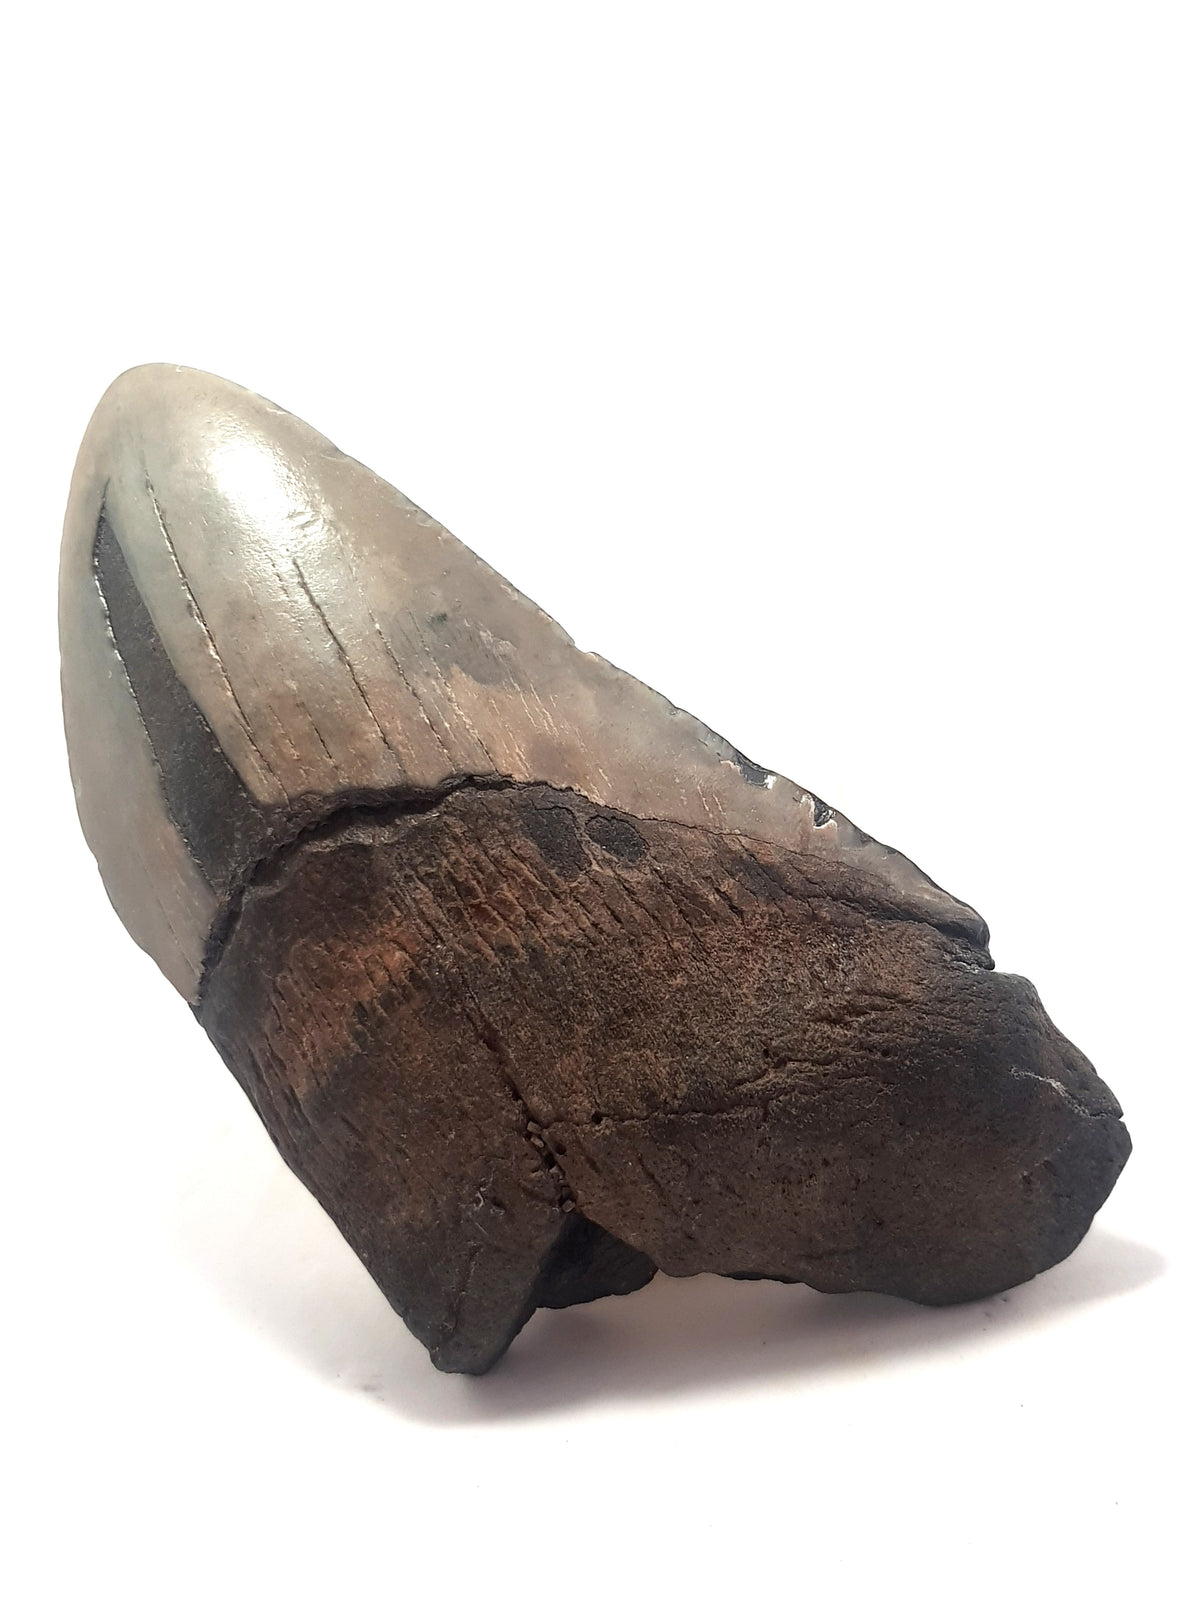 partial megalodon tooth. Missing bottom left corner of the root and some of the distal crown. the enamel is grey. A strip of enamel is missing on the left hand side. 